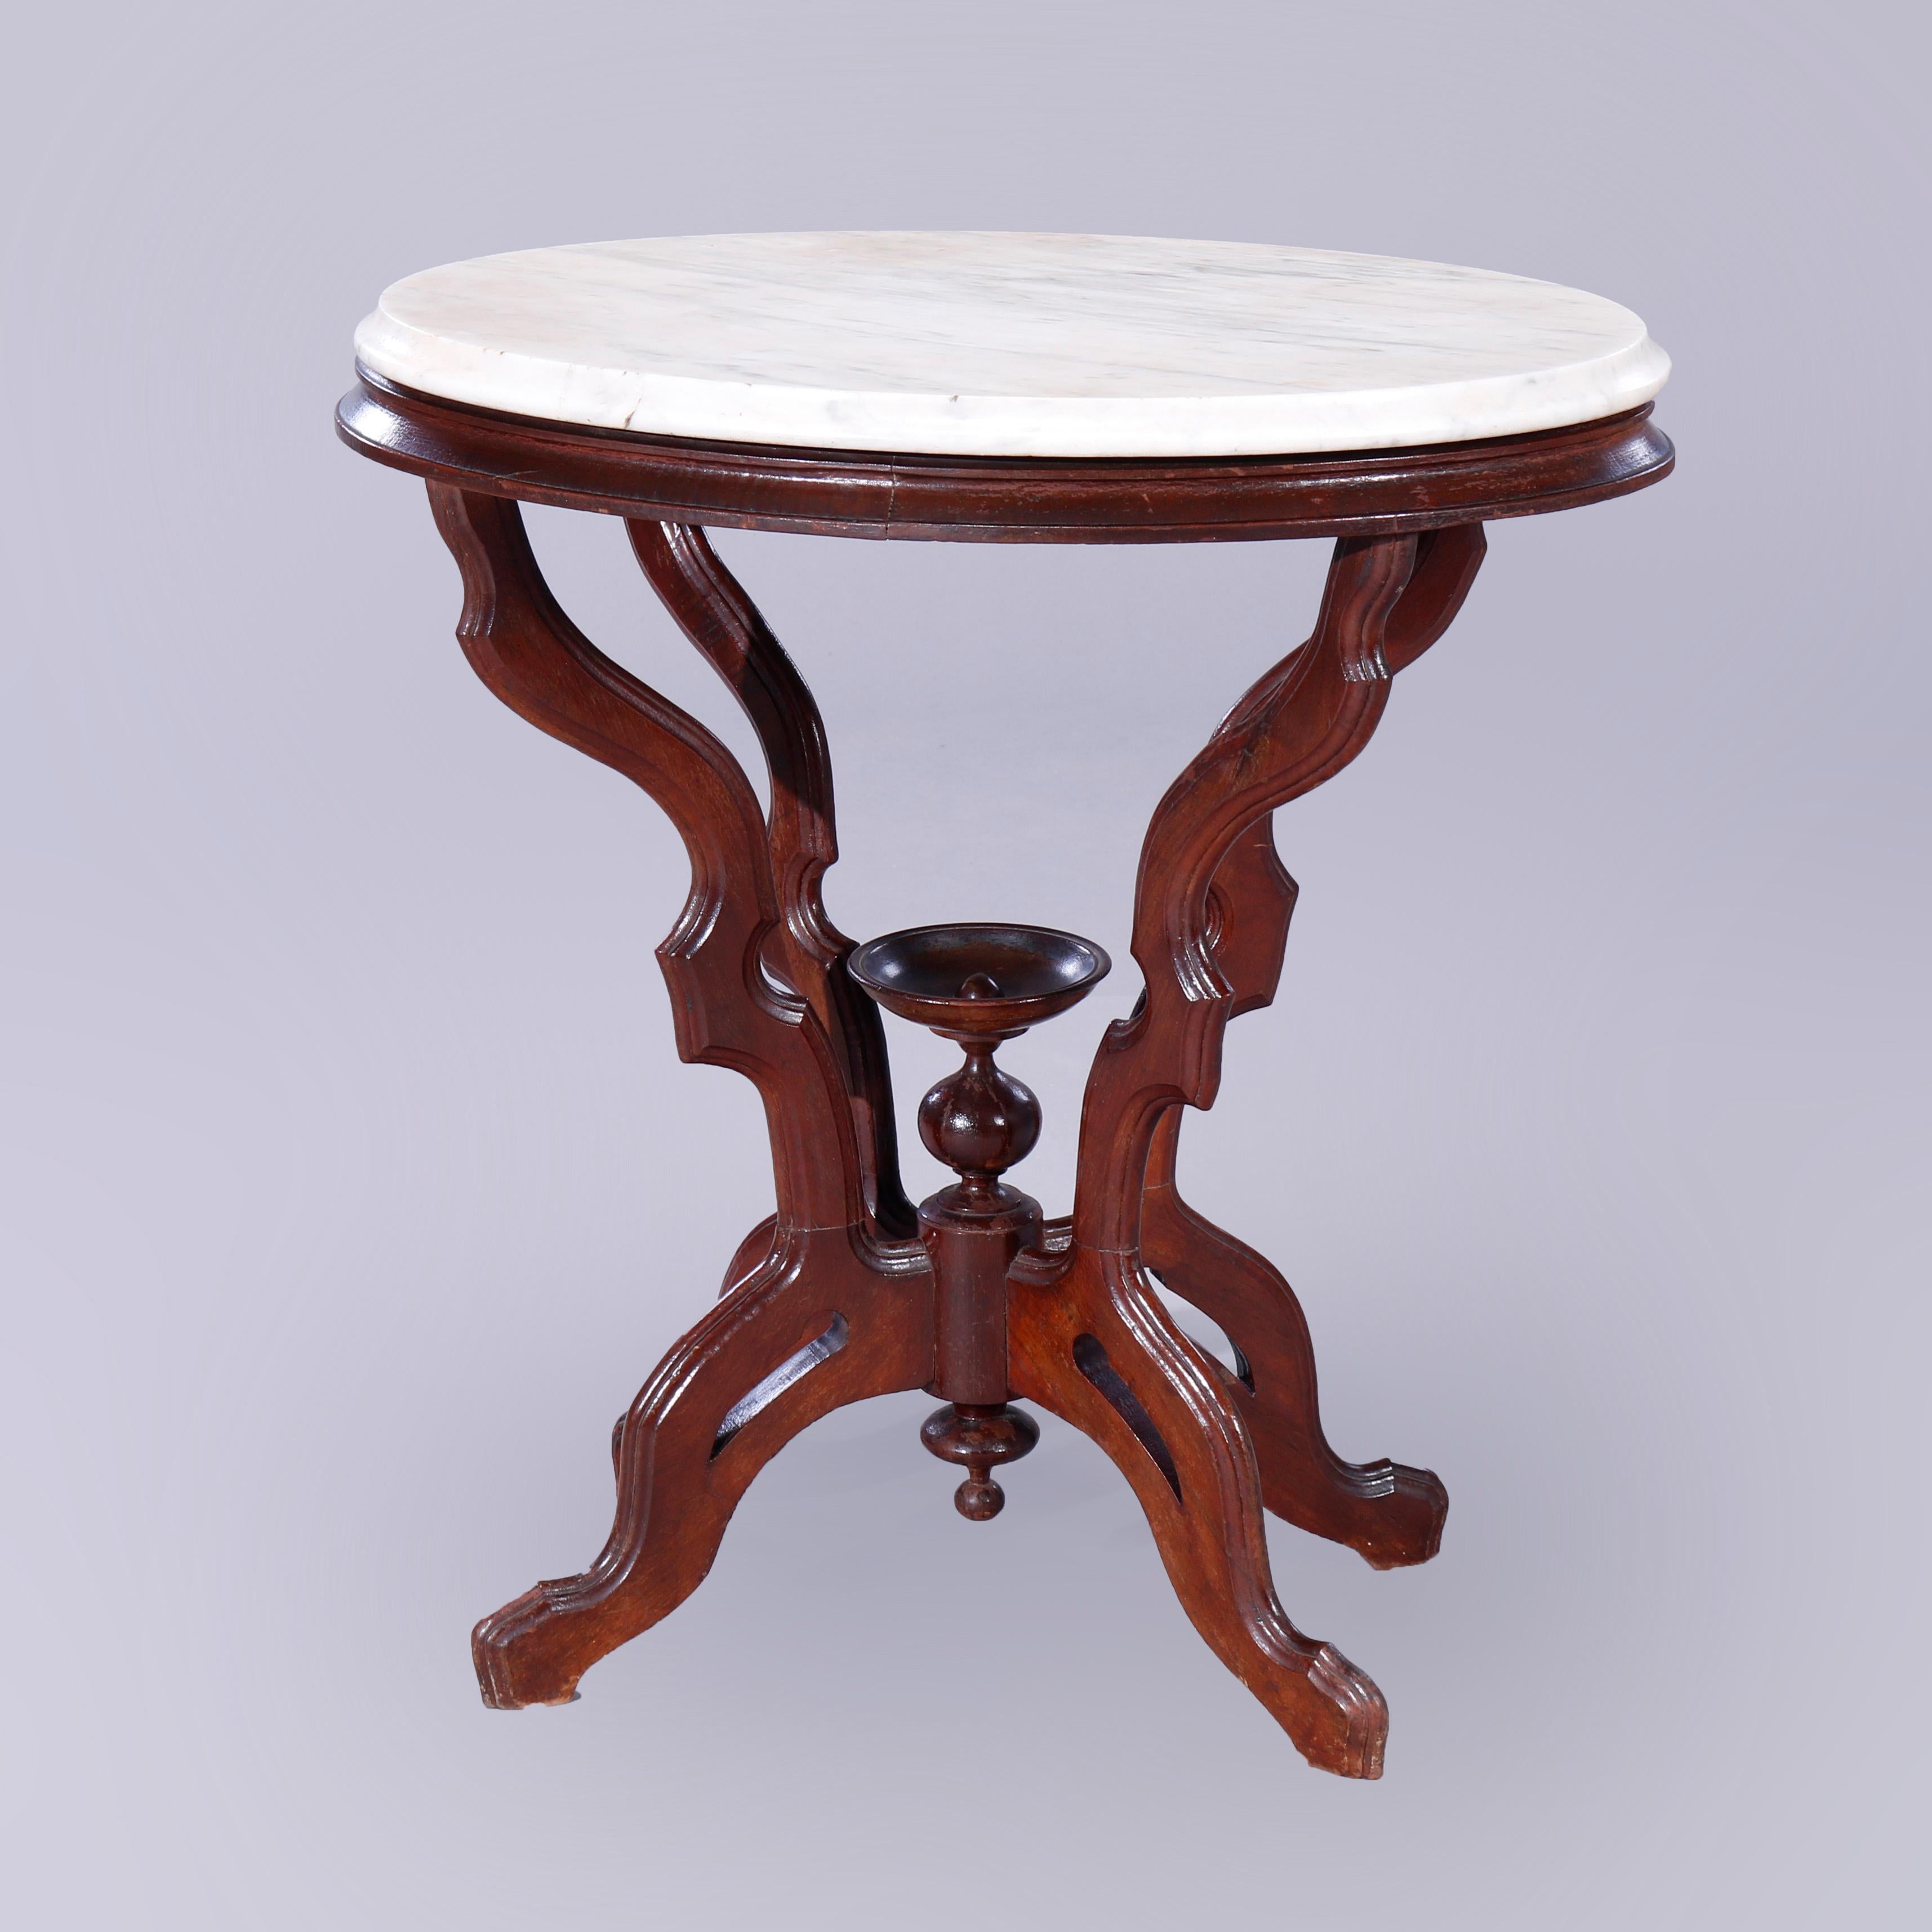 19th Century Antique Eastlake Oval Walnut & Marble Parlor Table, c1890